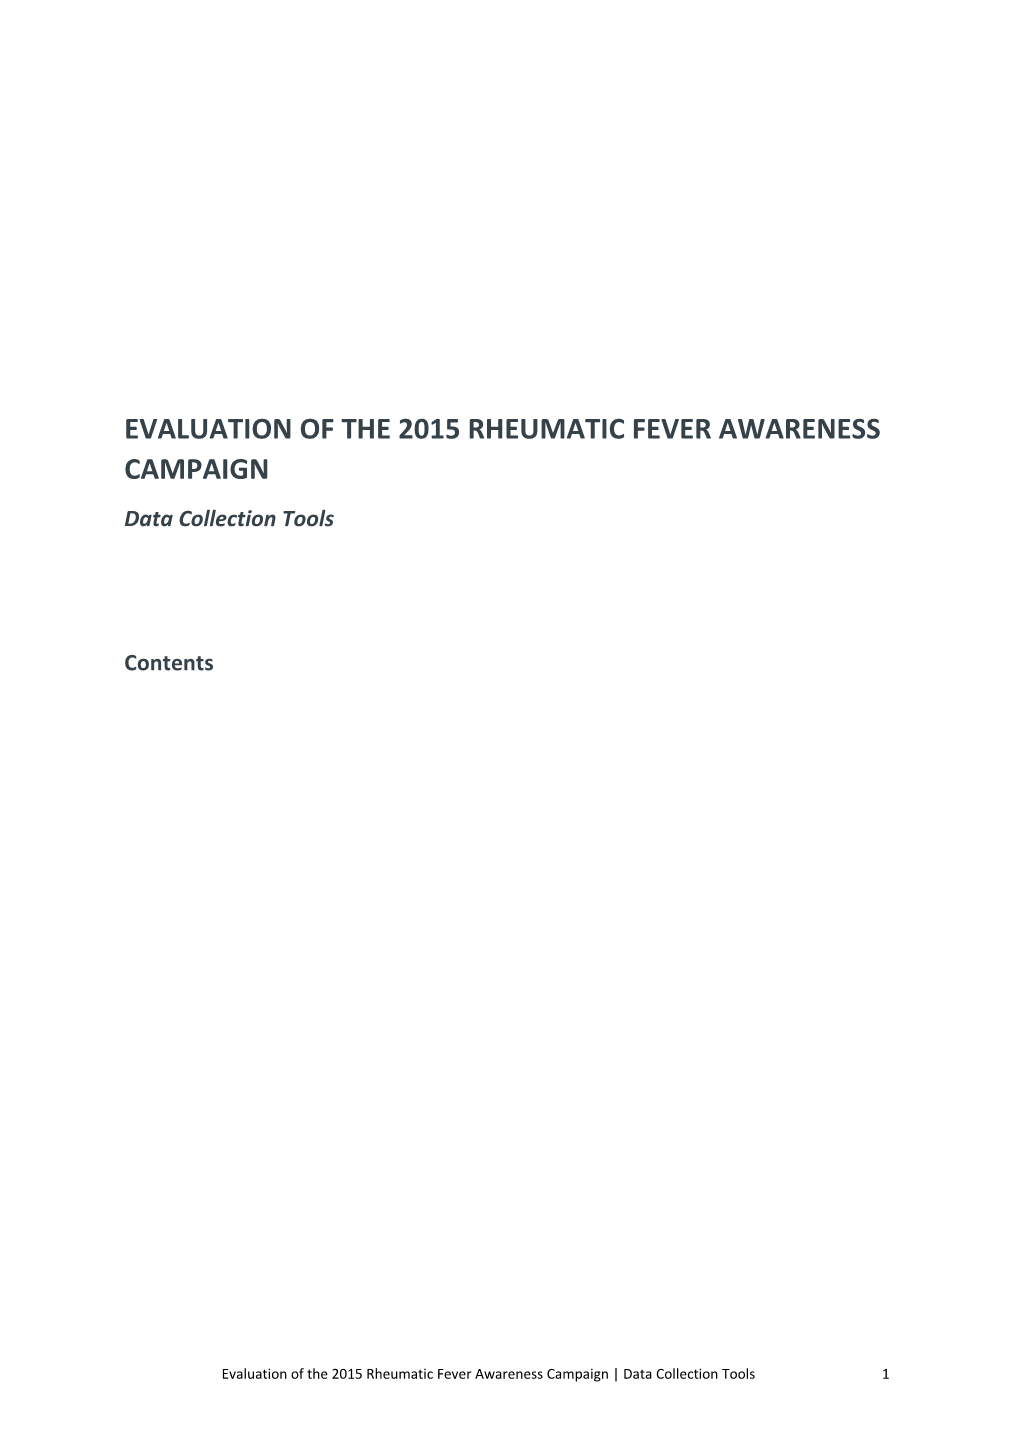 Evaluation of the 2015 Rheumatic Fever Awareness Campaign